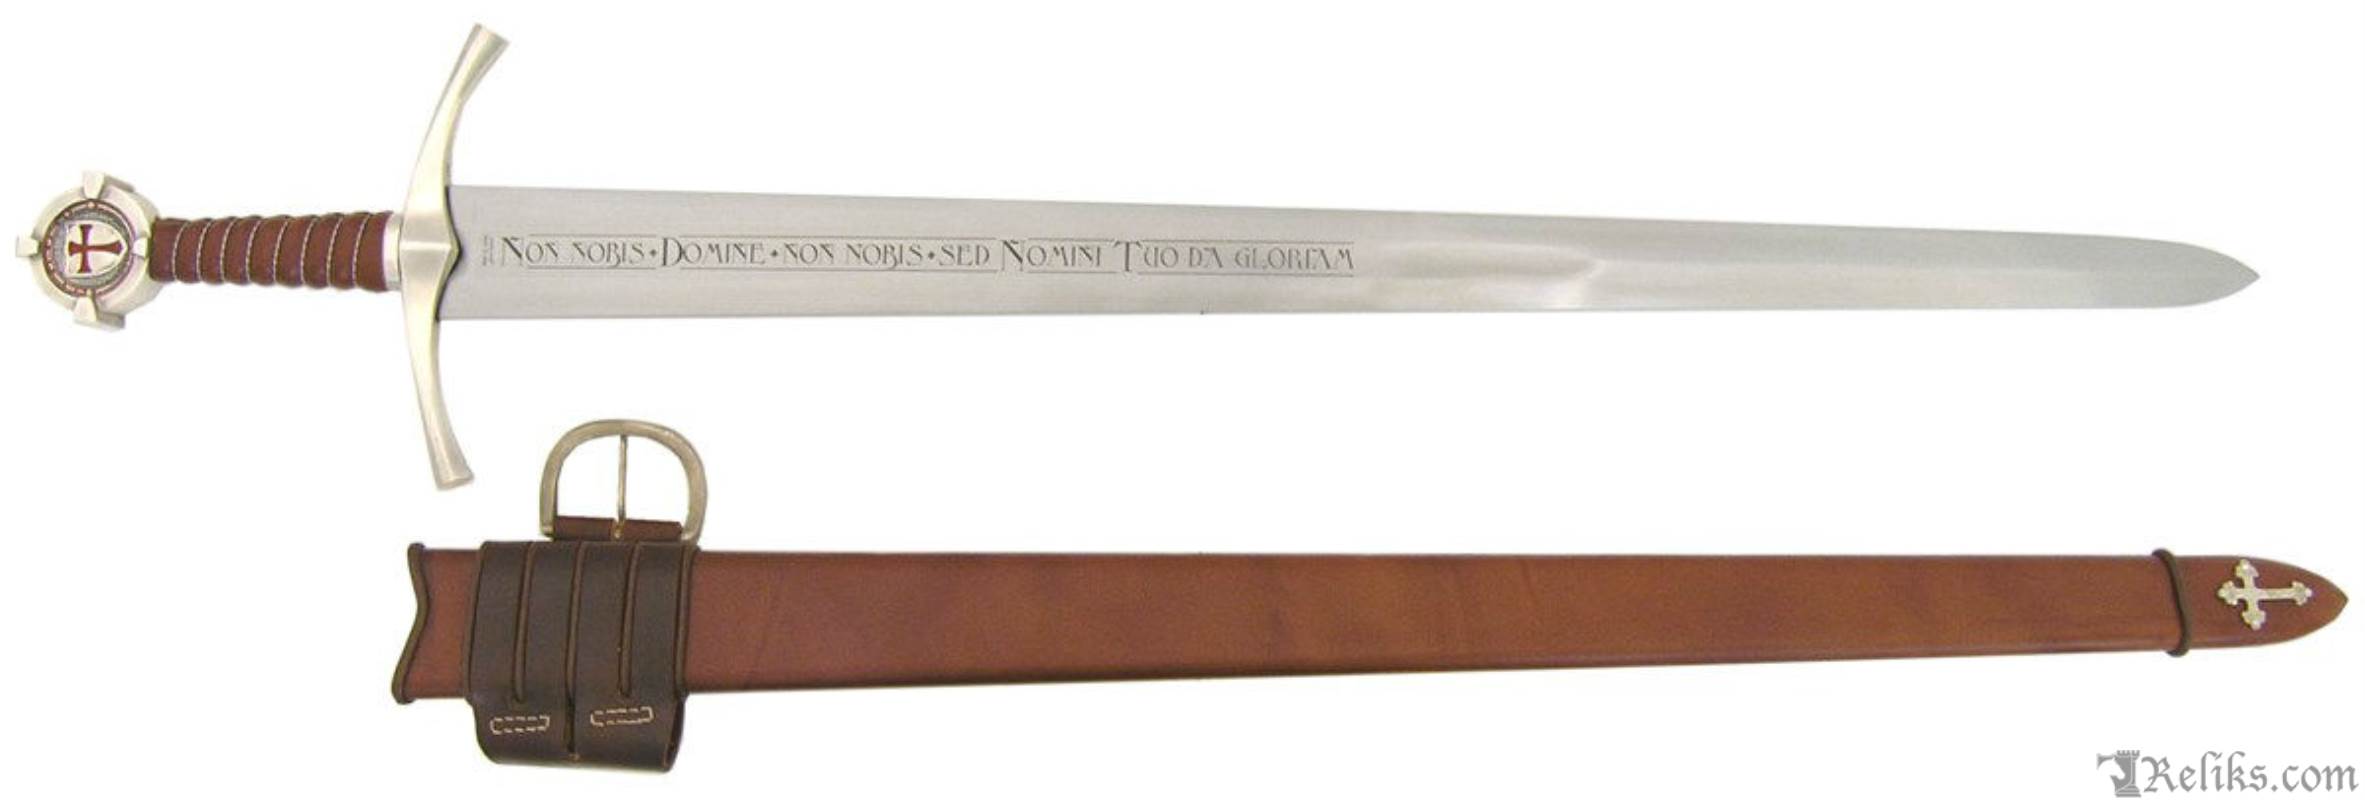 The Accolade Sword Of The Knights Templar Functional European Swords